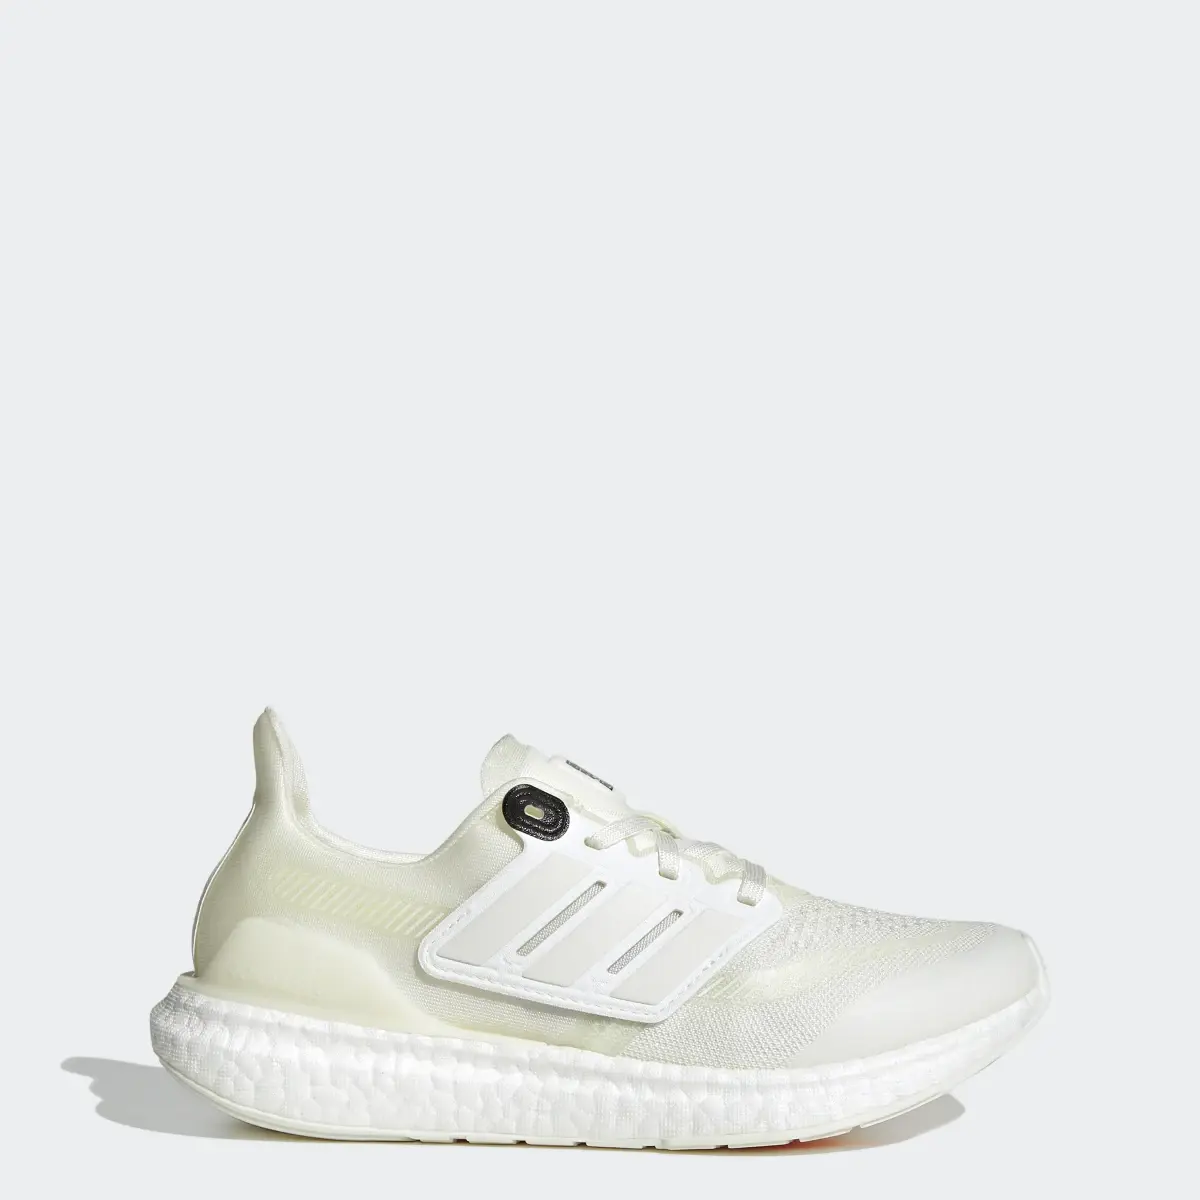 Adidas Ultraboost Made to be Remade 2.0 Laufschuh. 1